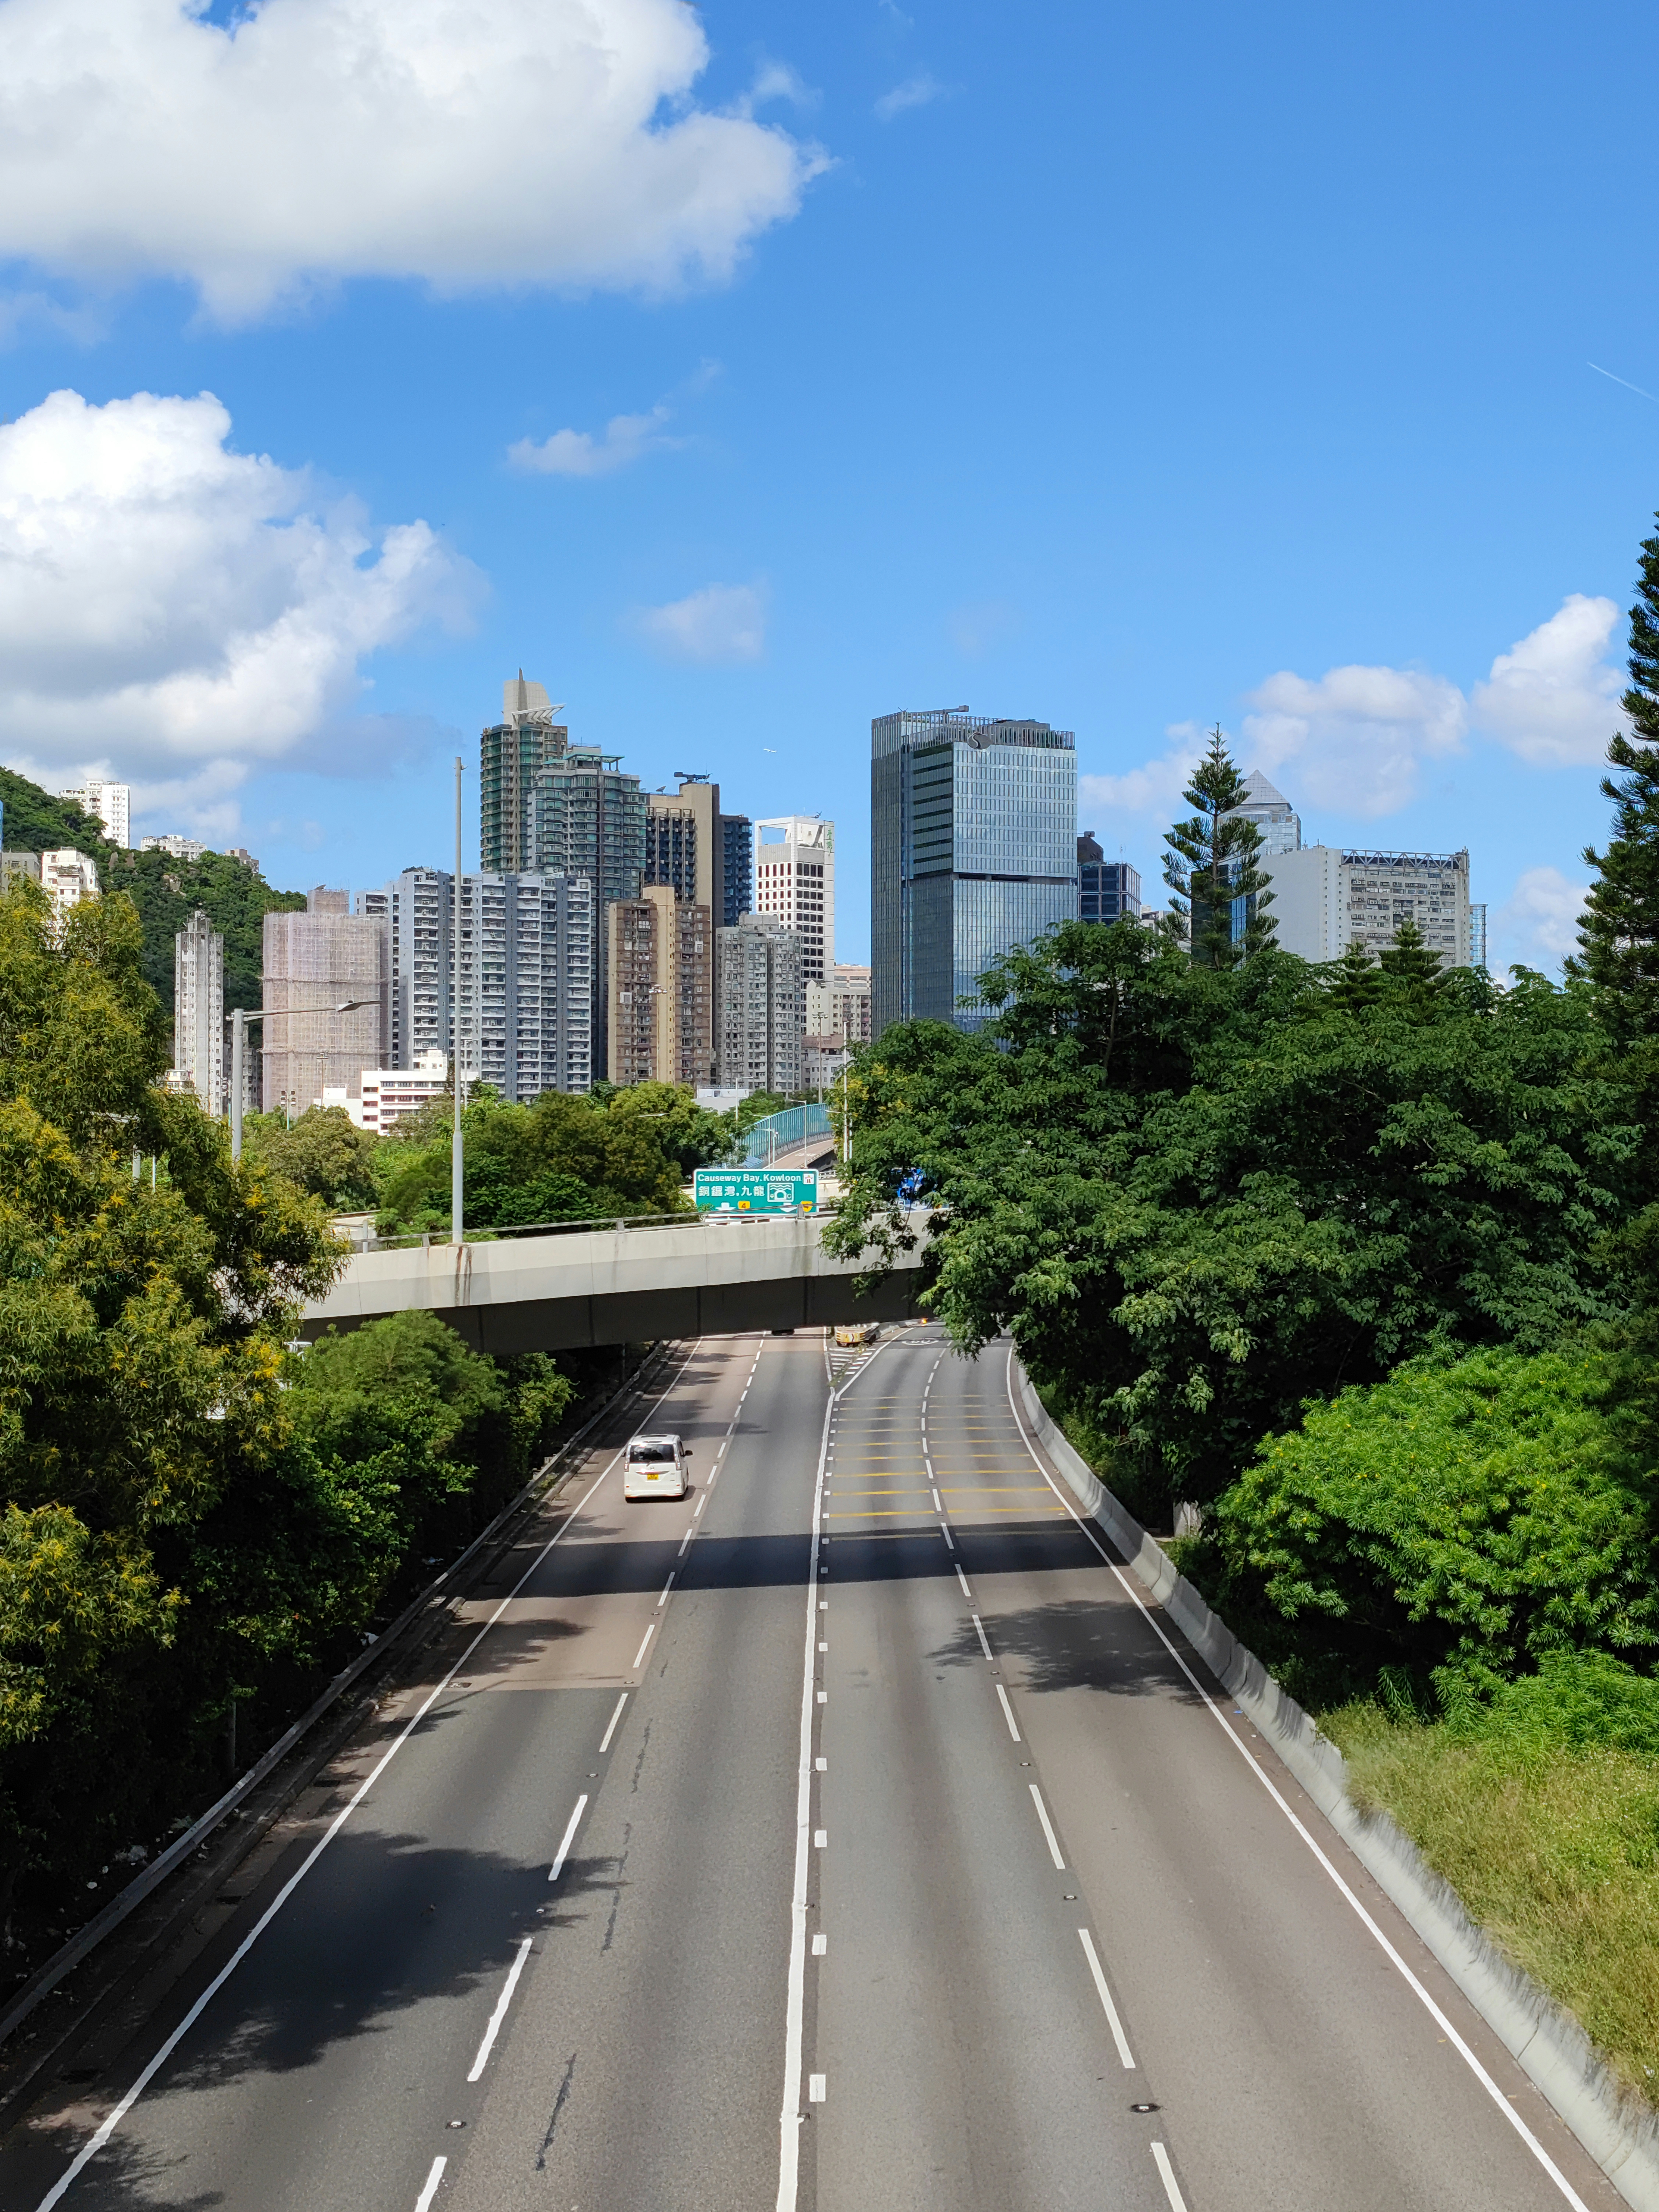 A highway called Eastern Corridor in the Eastern District of Hong Kong, viewing east towards the urban jungle in North Point, photo taken from the pedestrian bridge leading to Tai Koo Shing from the promenade section of Quarry Bay Park. A typical scene of highways in Hong Kong.